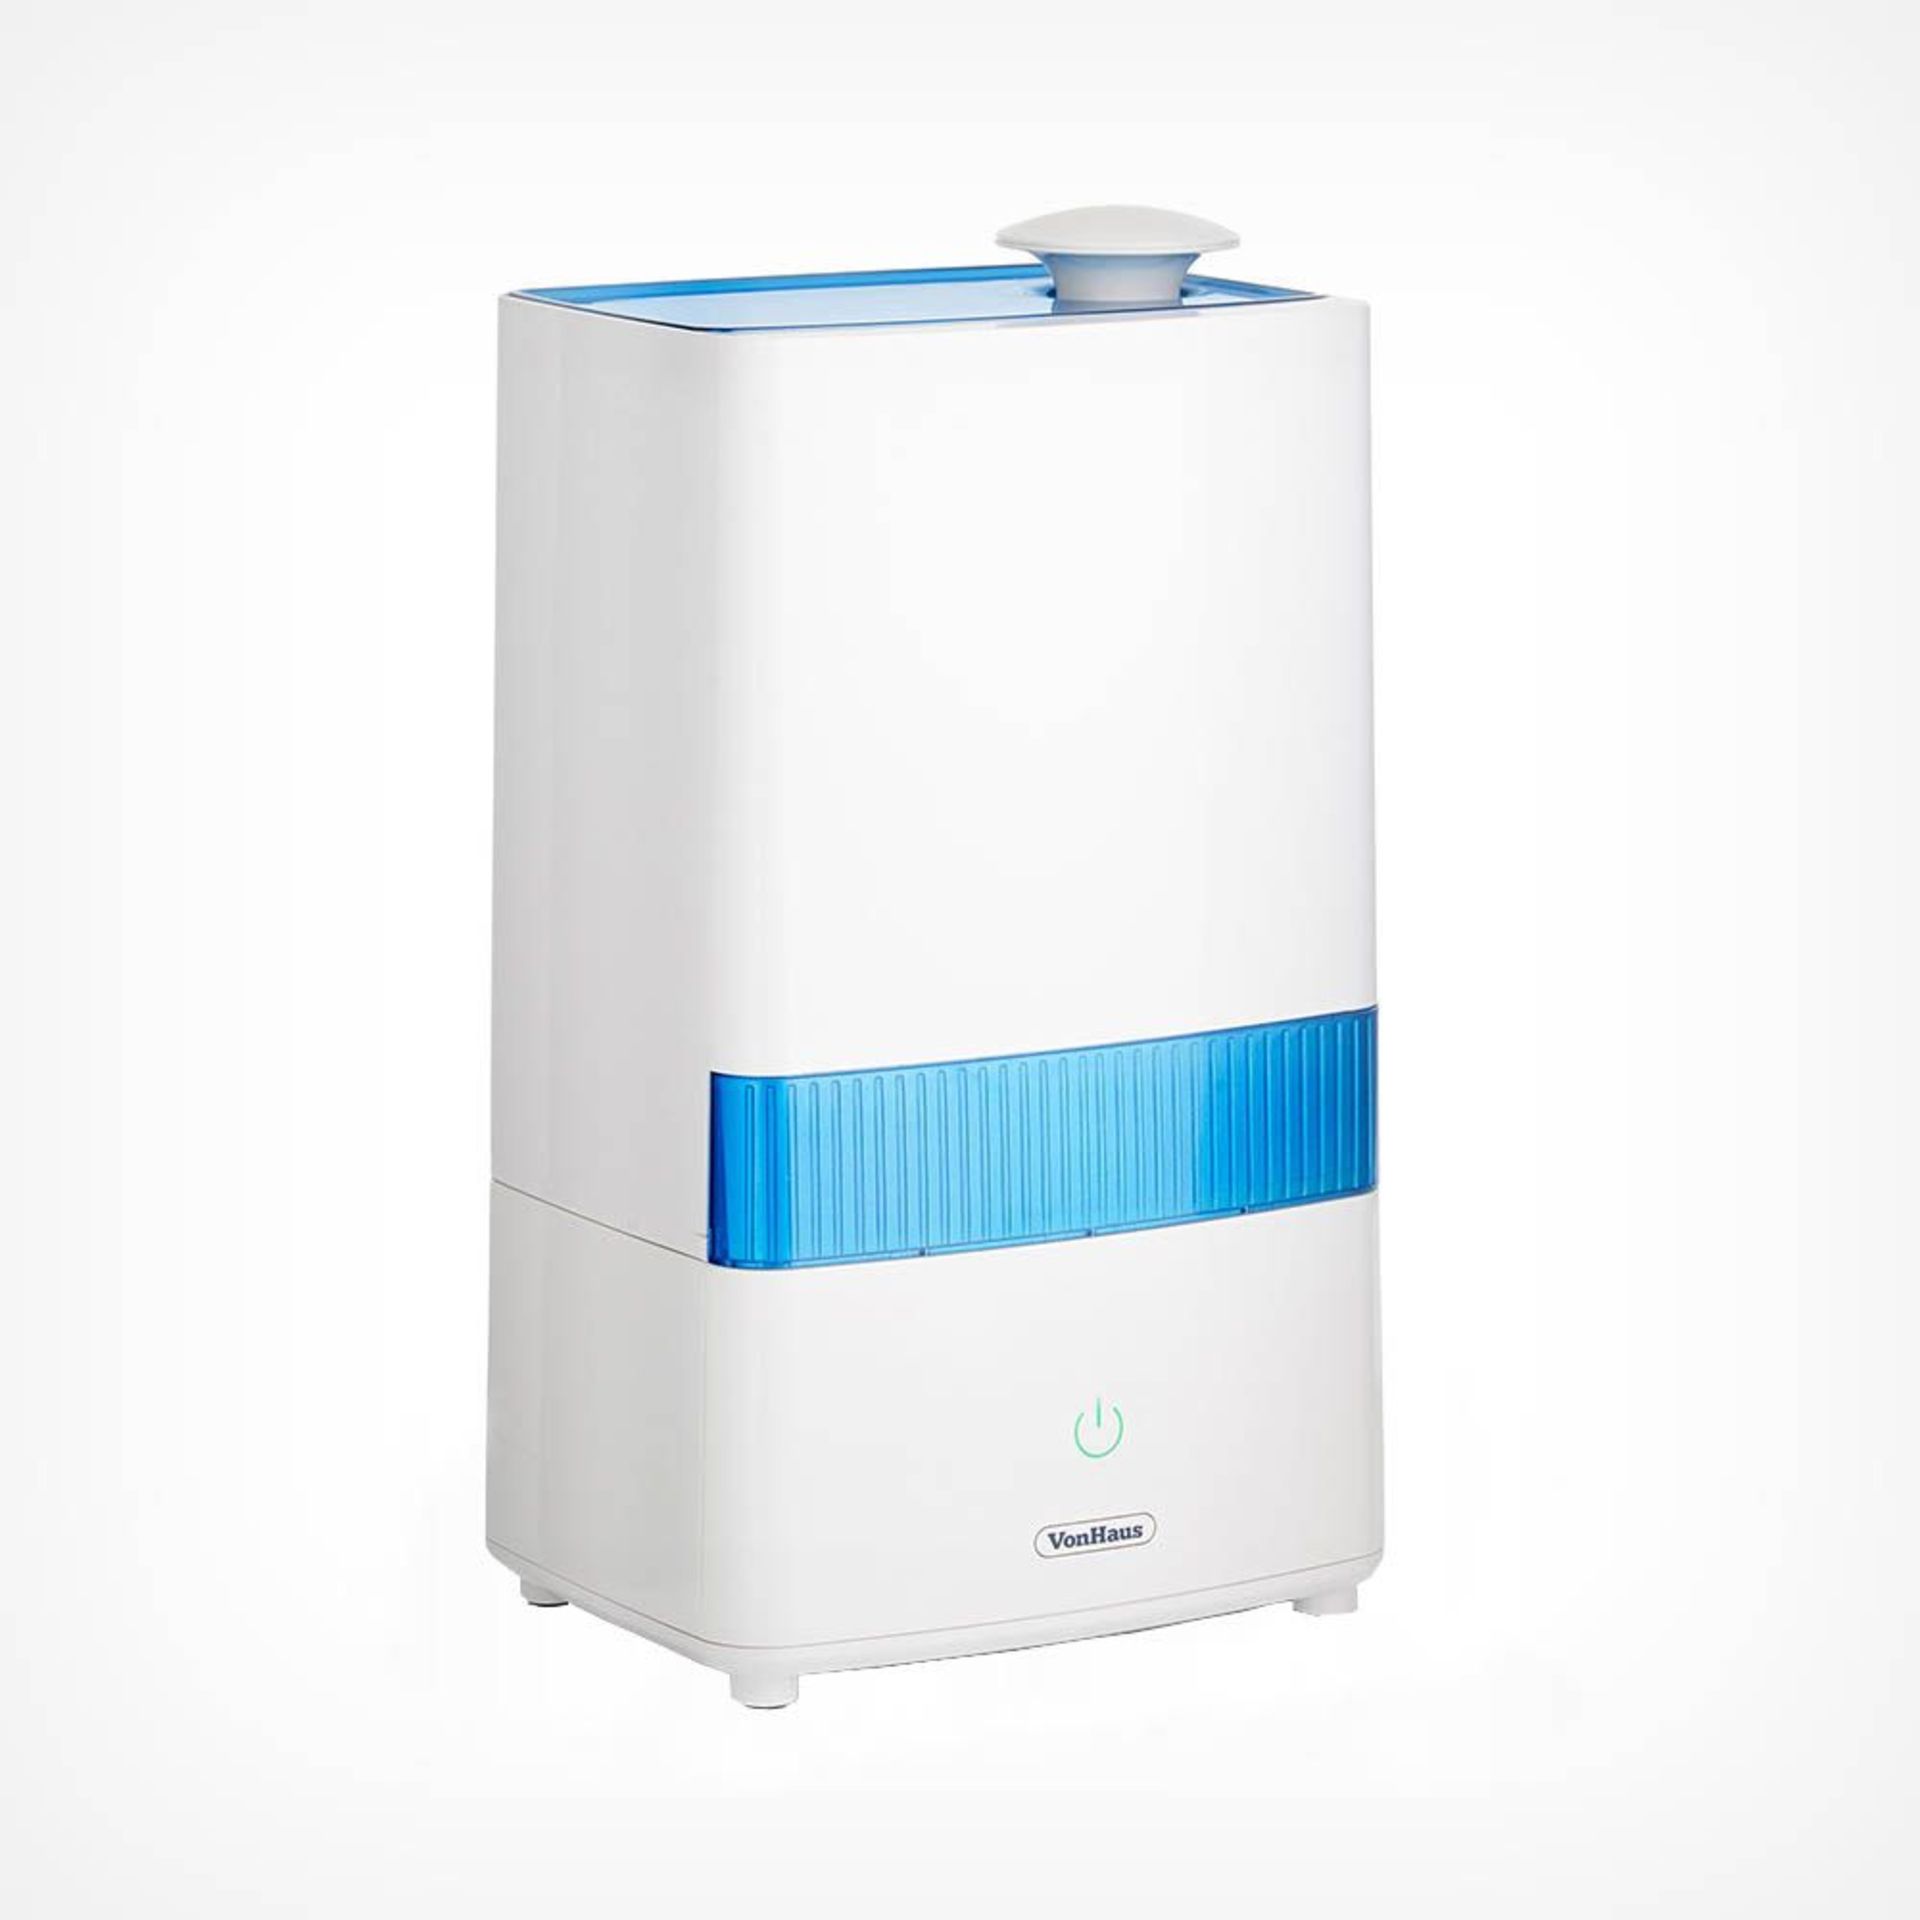 4.5L Humidifier. This compact 4.5-litre portable humidifier works by softening and purifying water